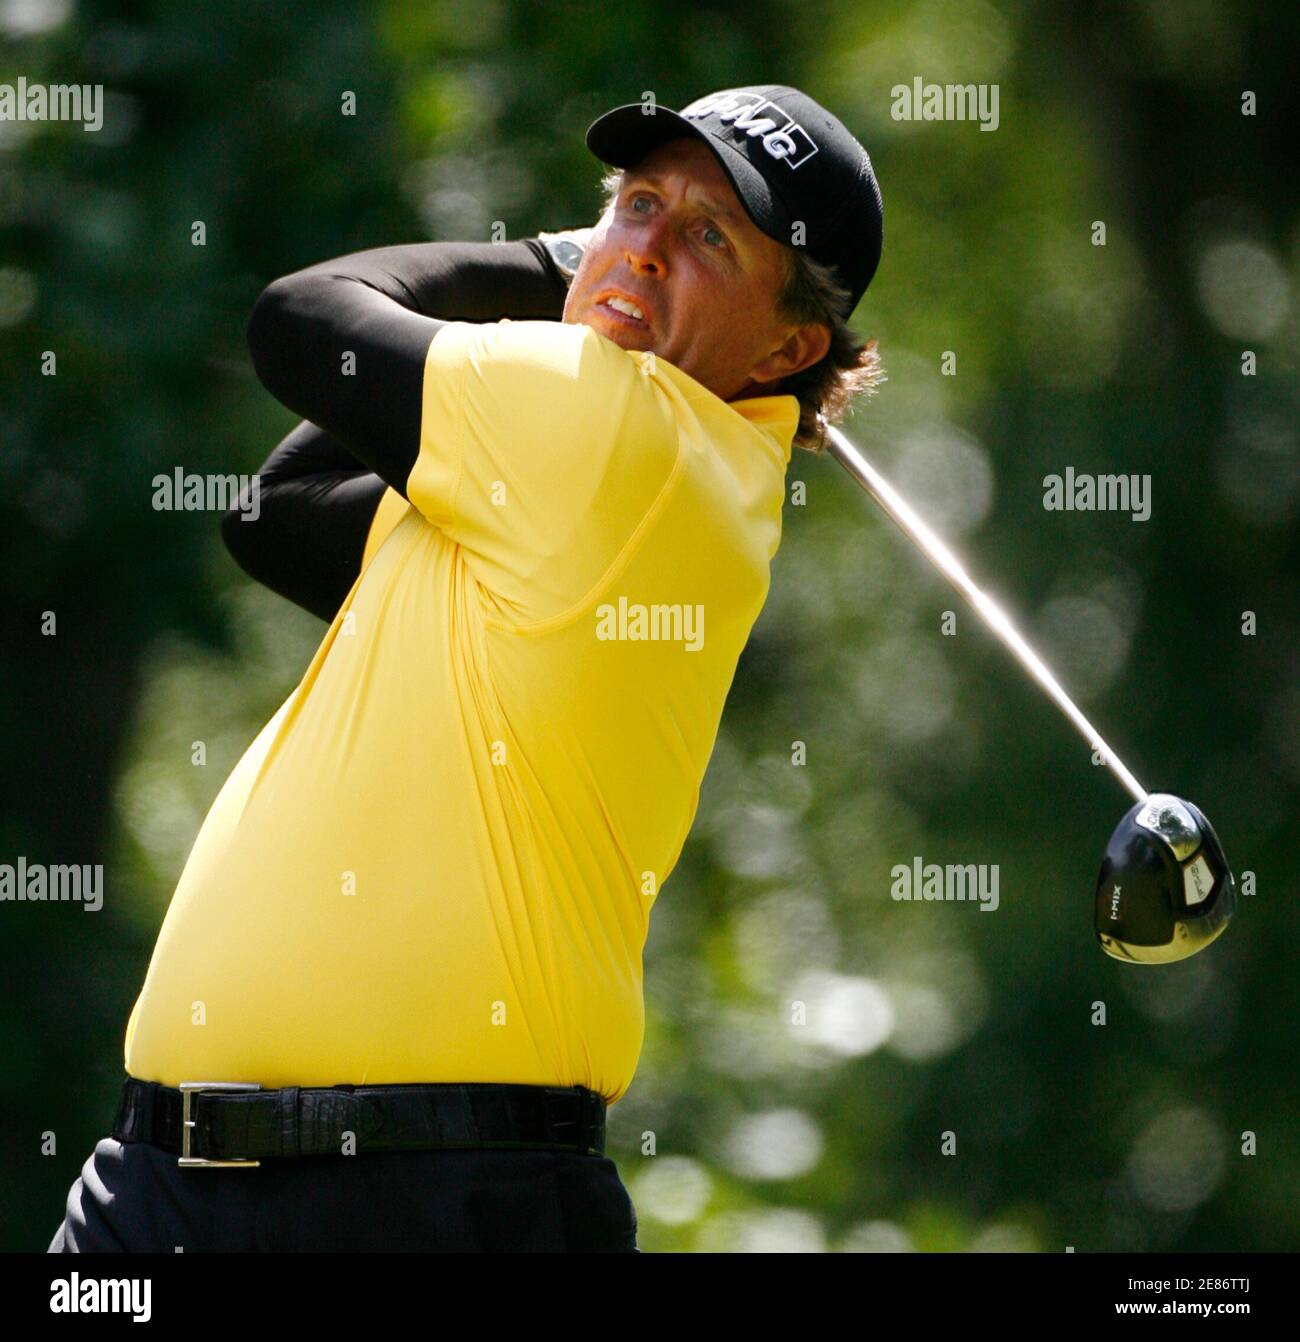 Phil Mickelson tees off at the eighteenth tee during the final round of the Scottish Open golf tournament at Loch Lommond near Glasgow, Scotland on July 13, 2008. REUTERS/David Moir (BRITAIN) Stock Photo